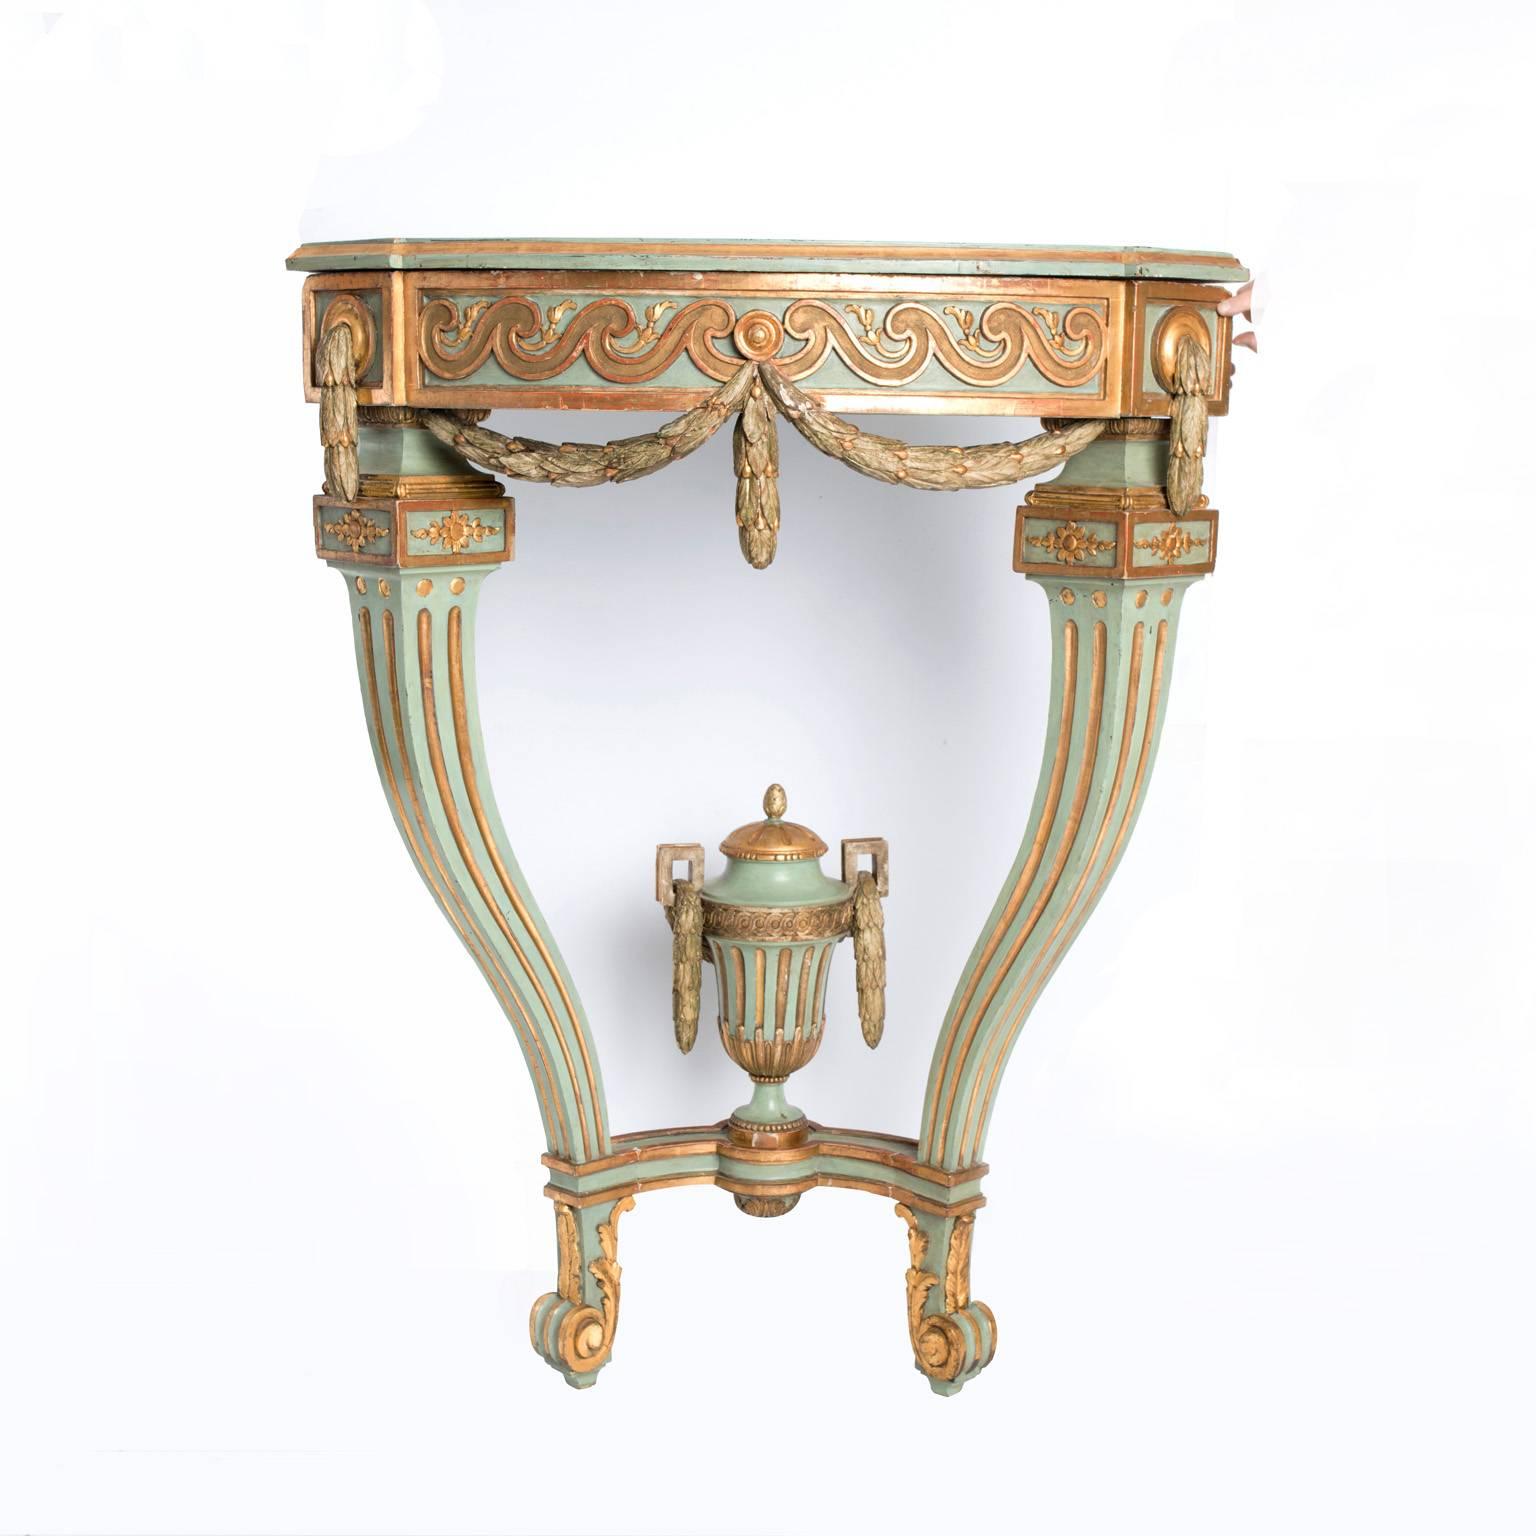 18th century grand green painted and gilded Gustavian corner console table. Apron with gilt wave-like carvings and a gilt carved leaf-garland. Two square fluted cabriole legs with scrolled feet. Stretcher with a large urn finial with gilt carved